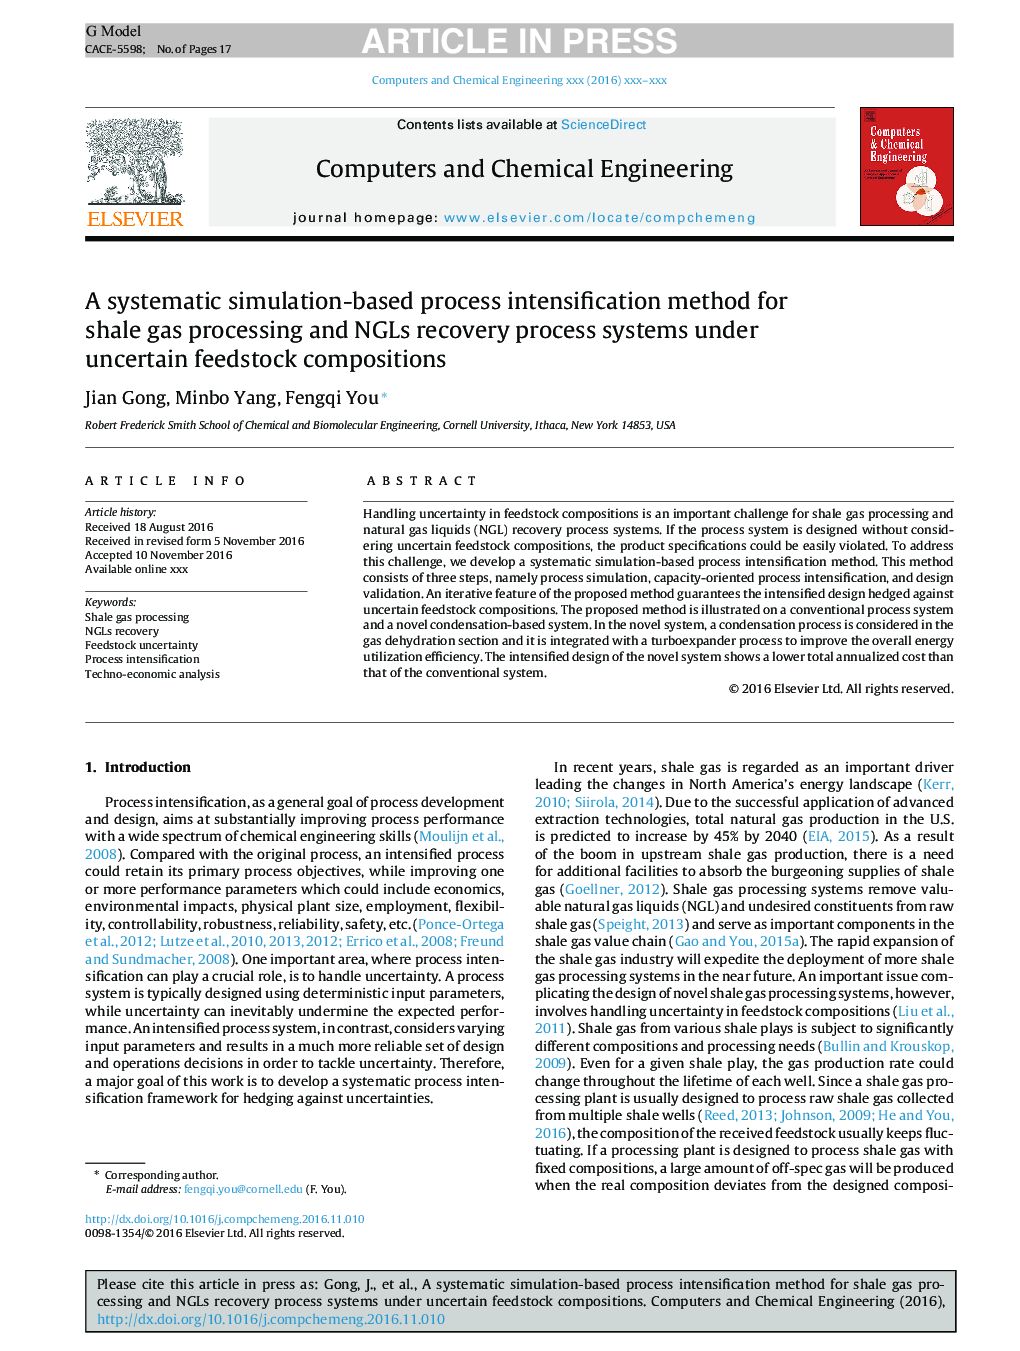 A systematic simulation-based process intensification method for shale gas processing and NGLs recovery process systems under uncertain feedstock compositions